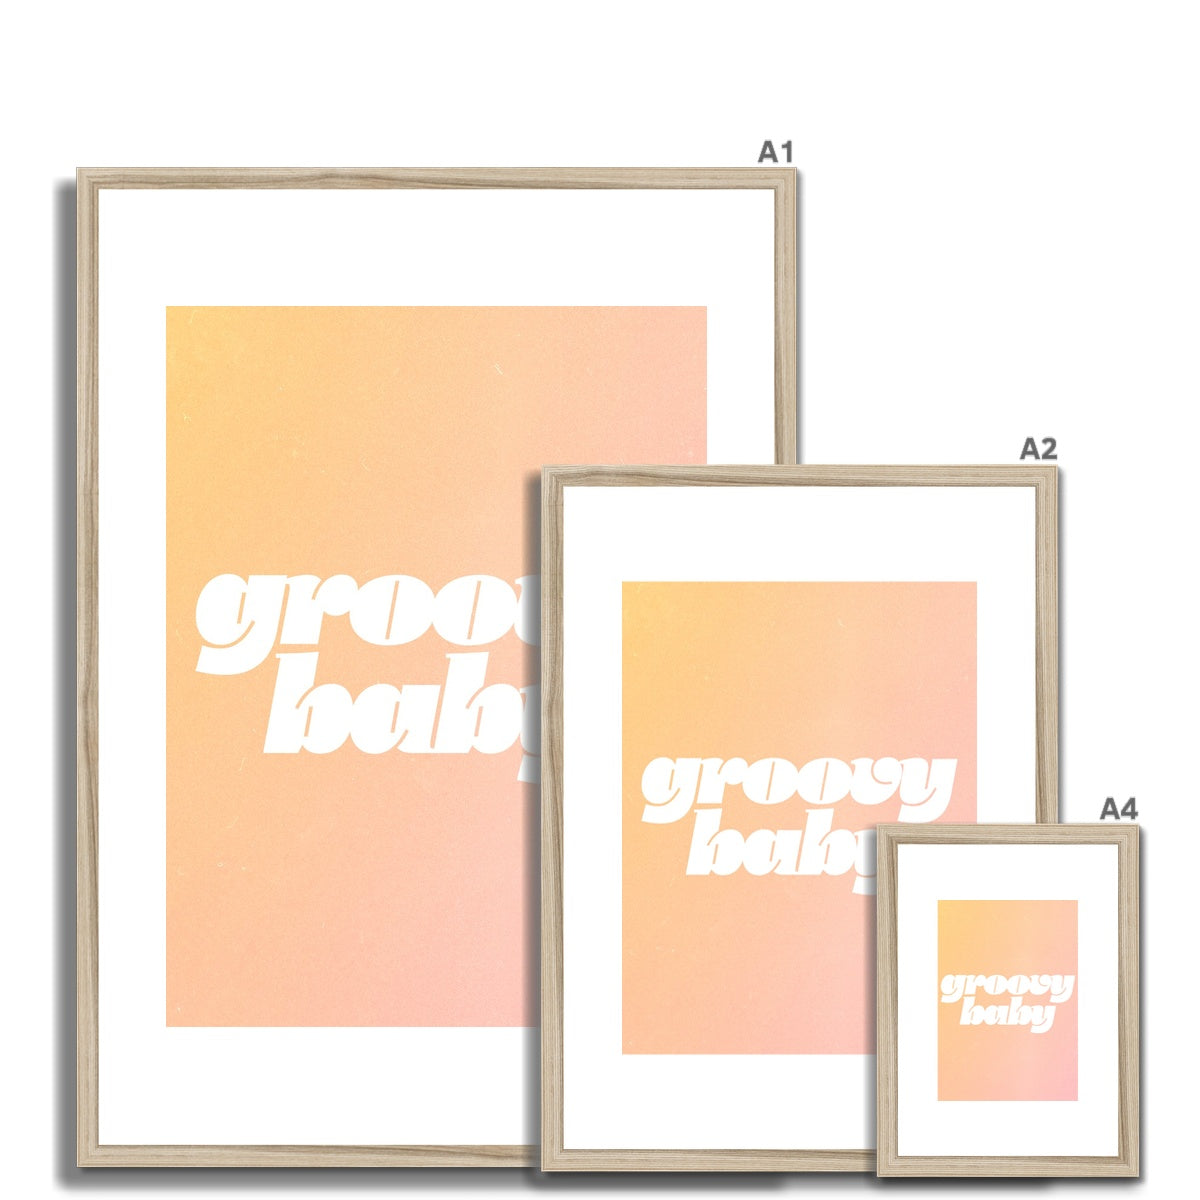 Groovy baby Framed & Mounted Print